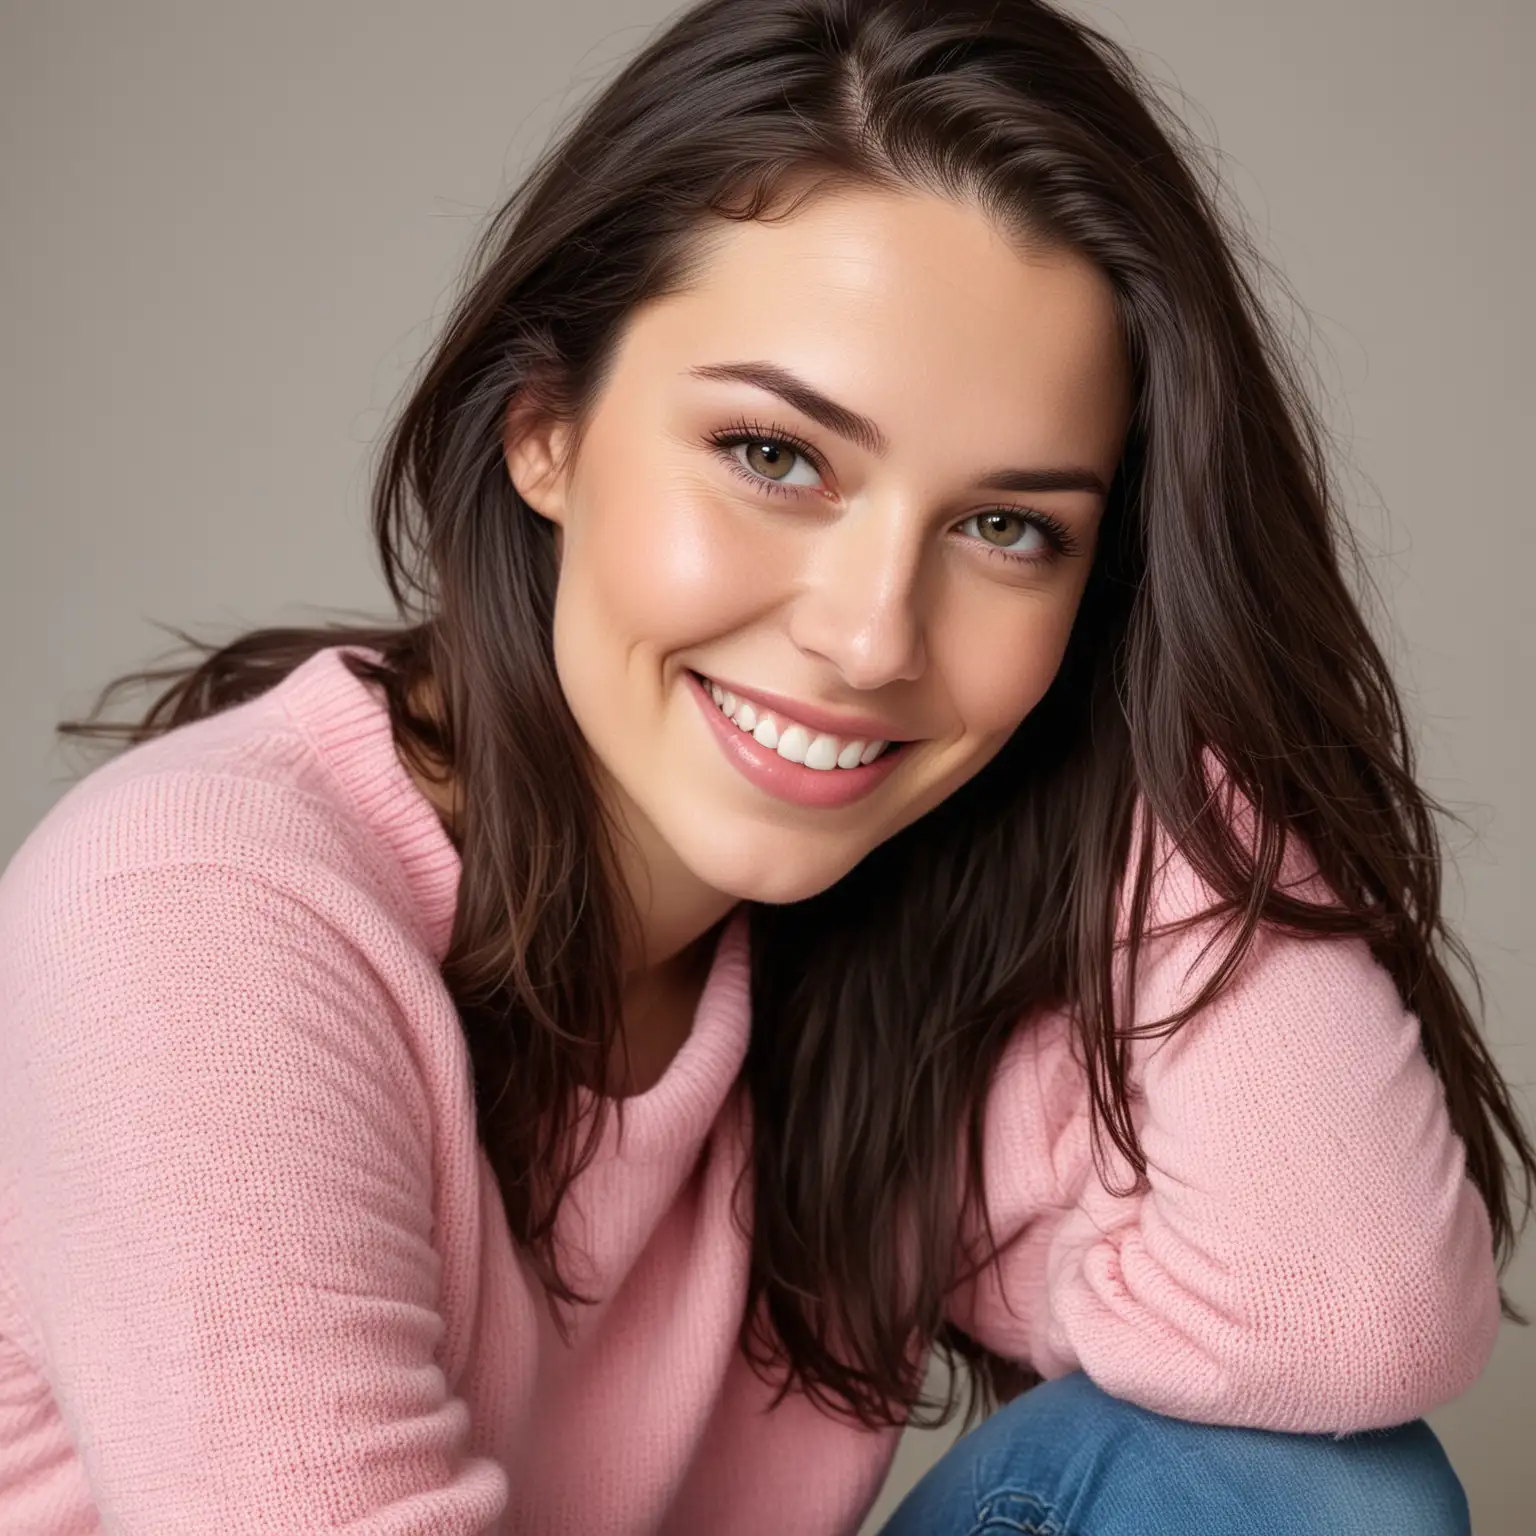 Up close 30 year old pale white woman with long big dark brown hair, wearing a pink sweater and blue jeans smiling at camera, white background